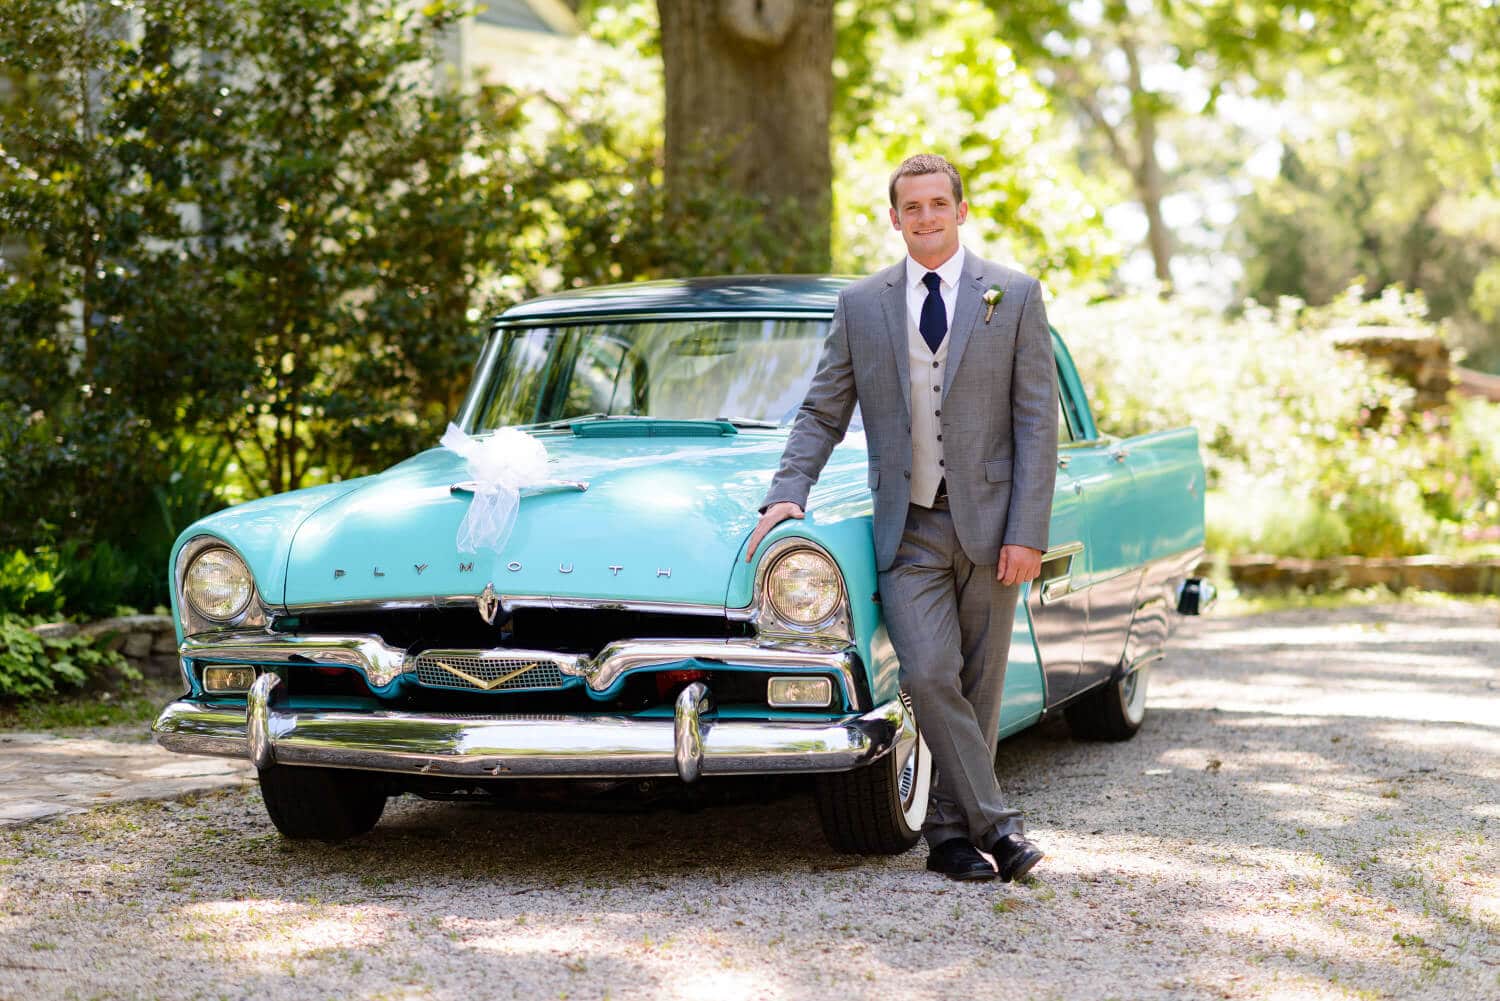 Groom by classic car, The Ivy Place